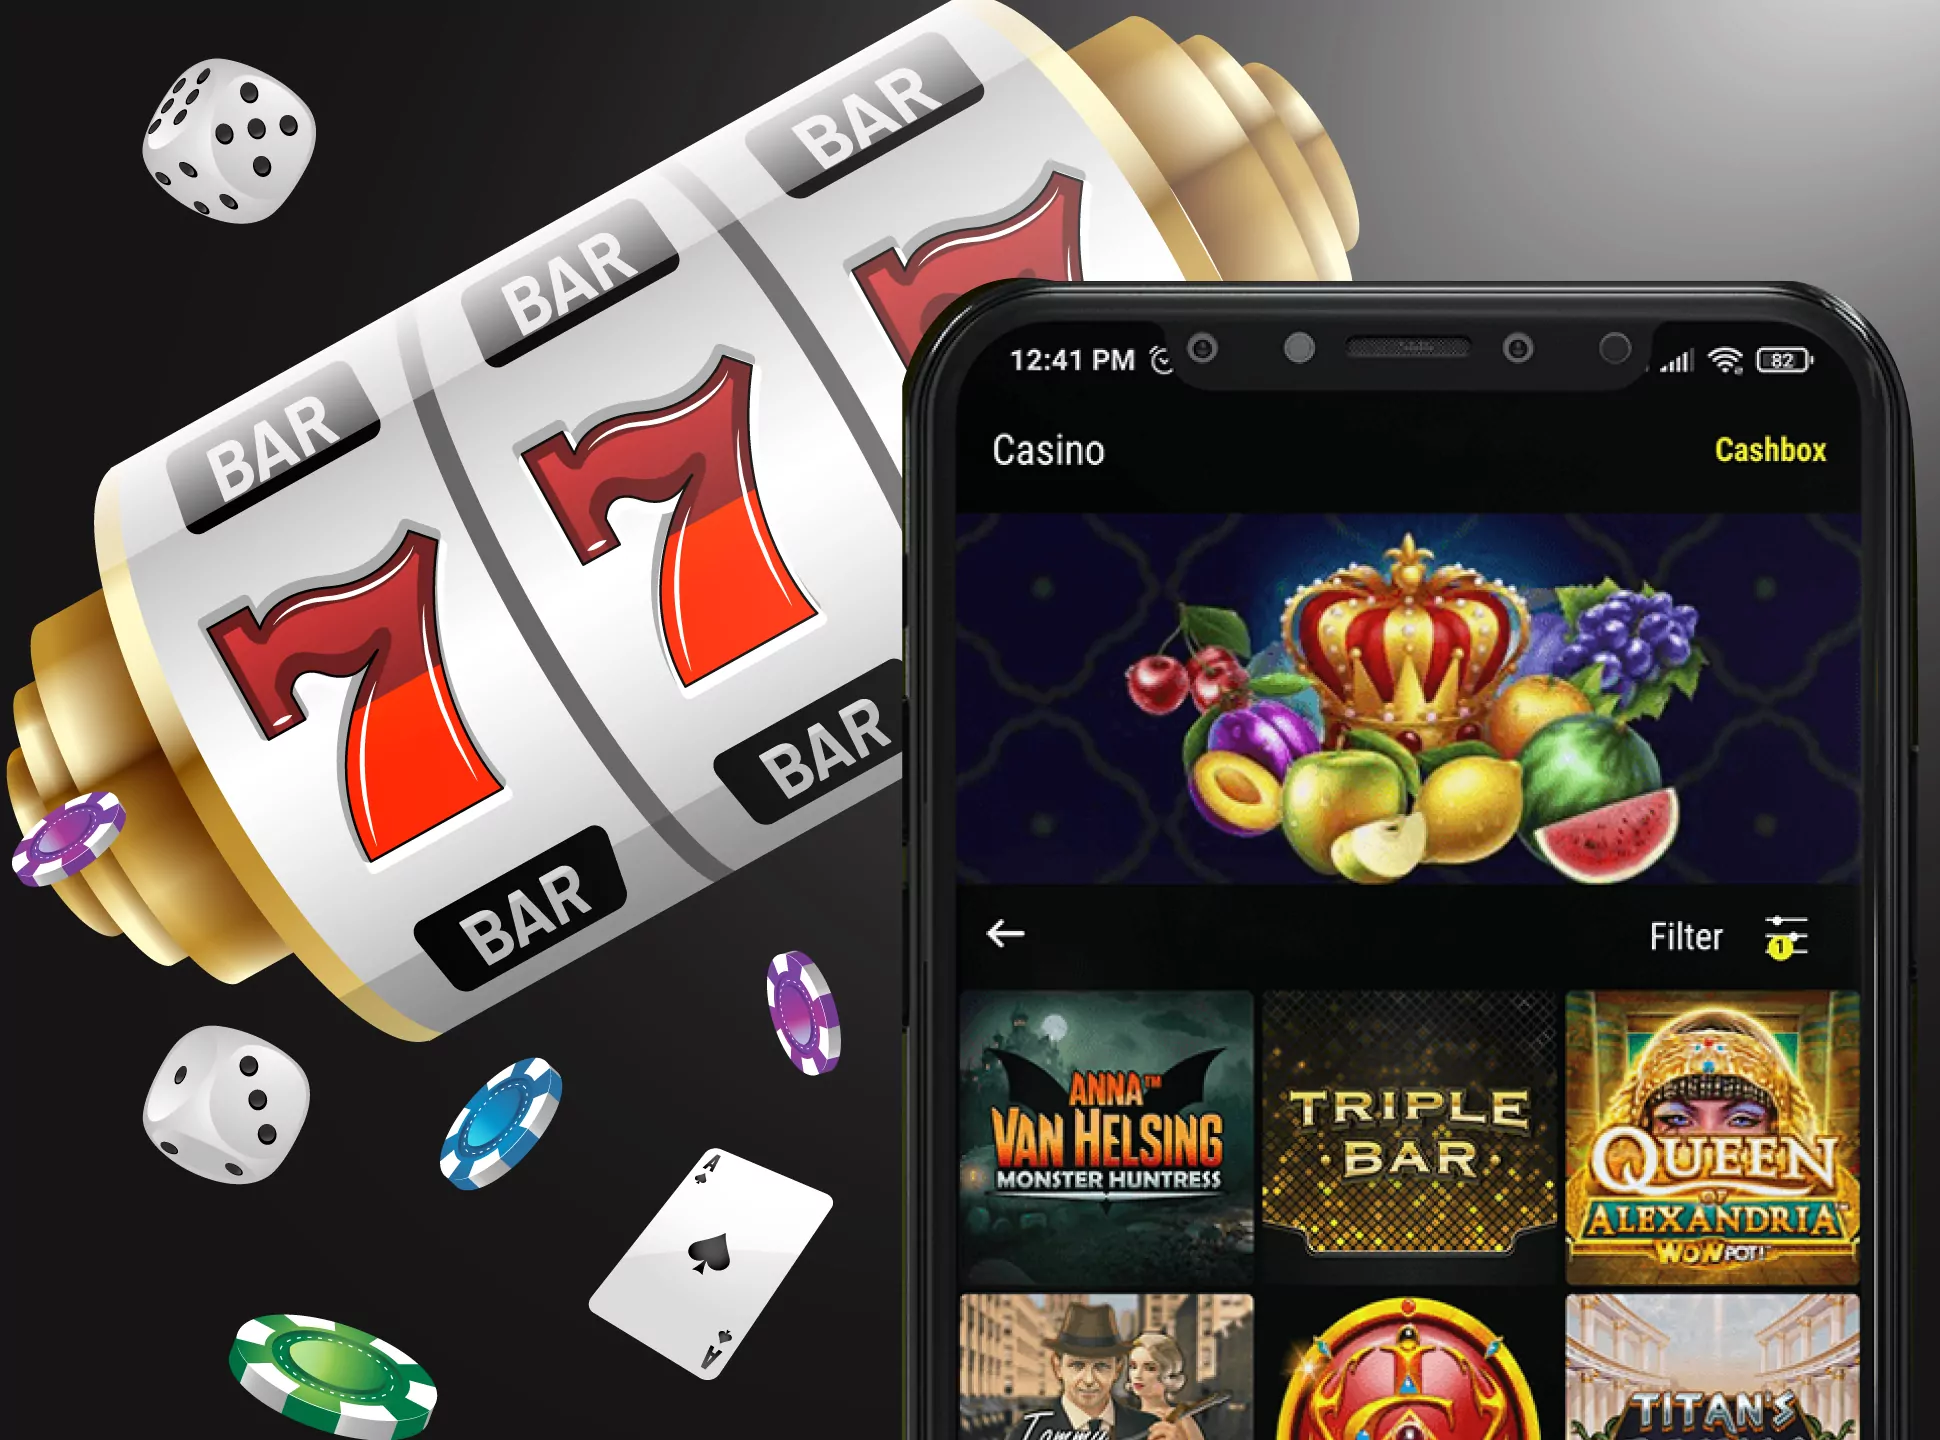 You will find various slots in the Parimatch mobile casino.